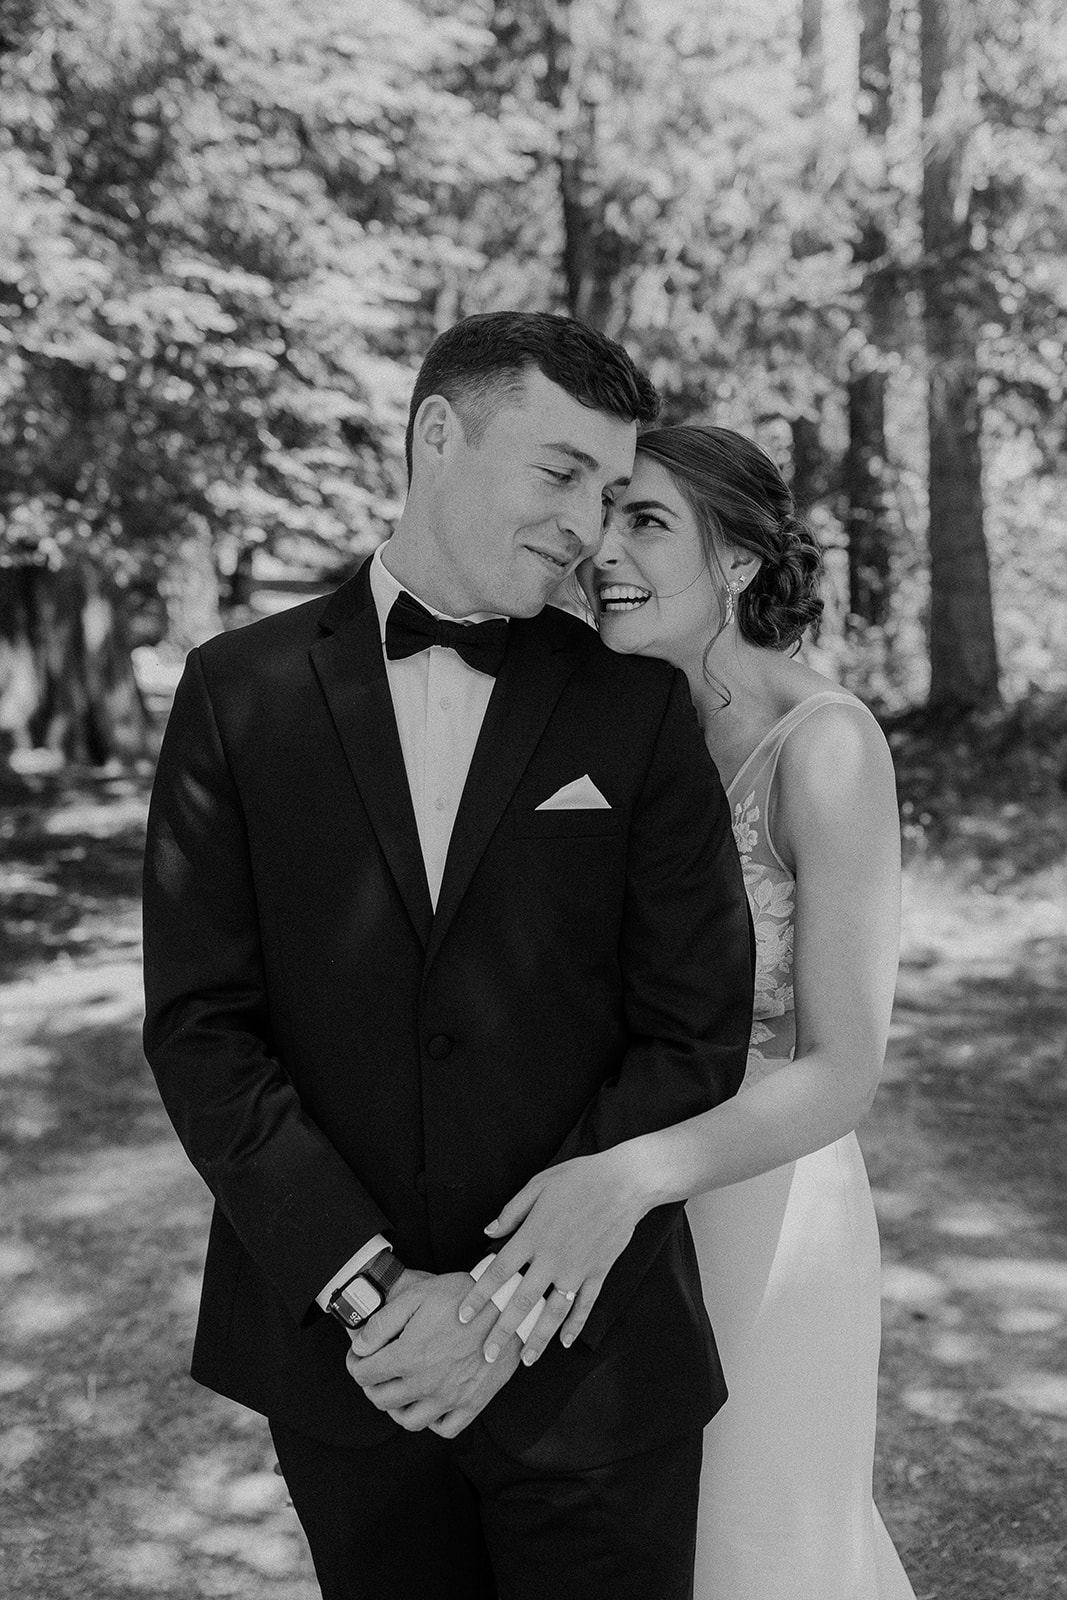 Bride and groom special moment black and white photo at private lake front property wedding.